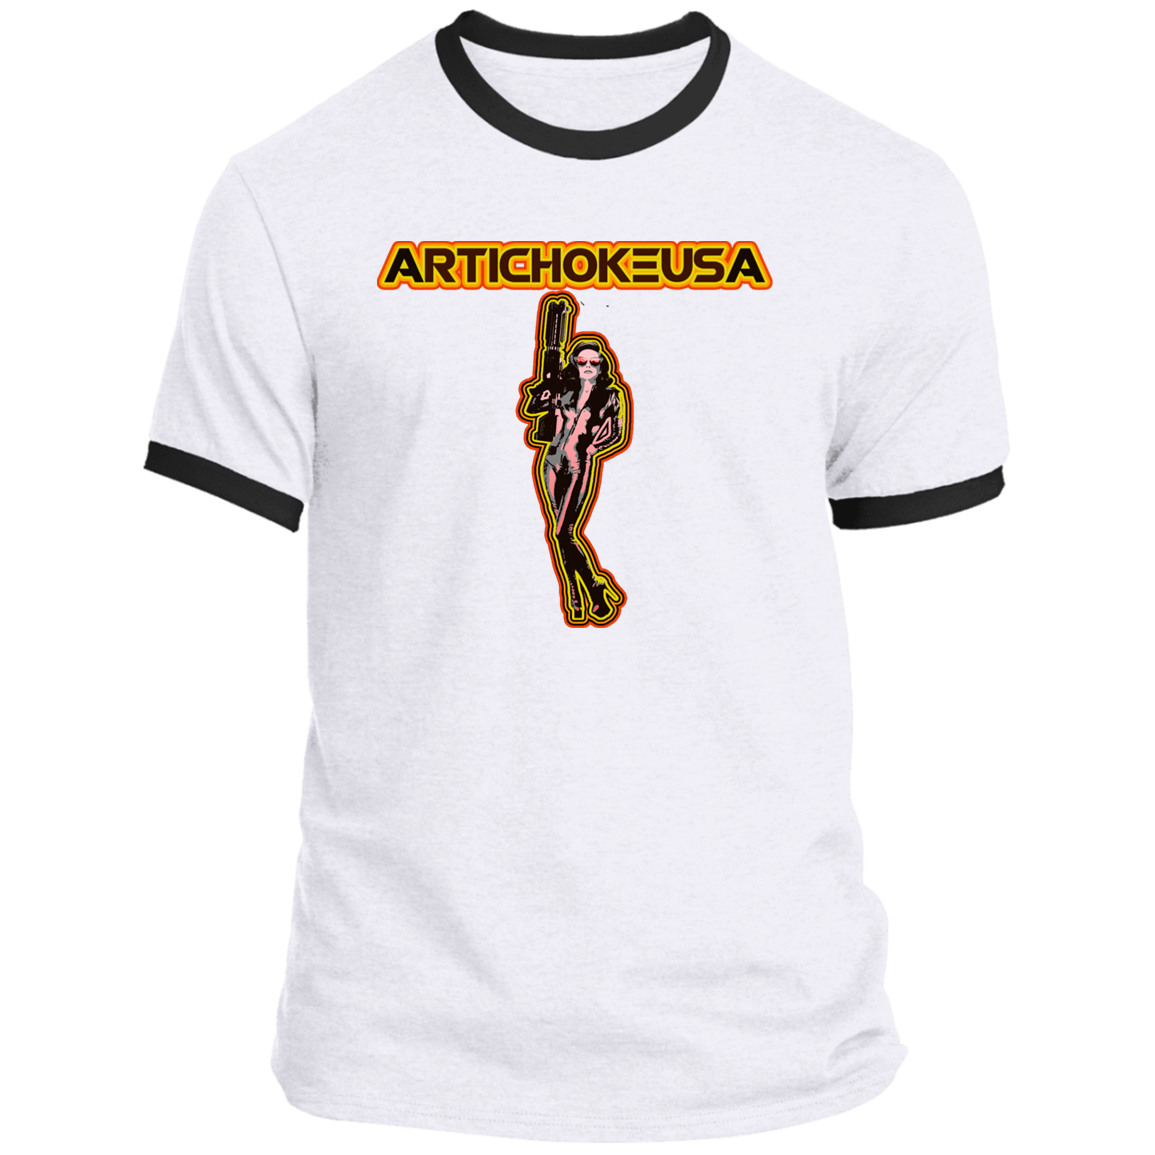 ArtichokeUSA Character and Font design. Let's Create Your Own Team Design Today. Mary Boom Boom. Ringer Tee